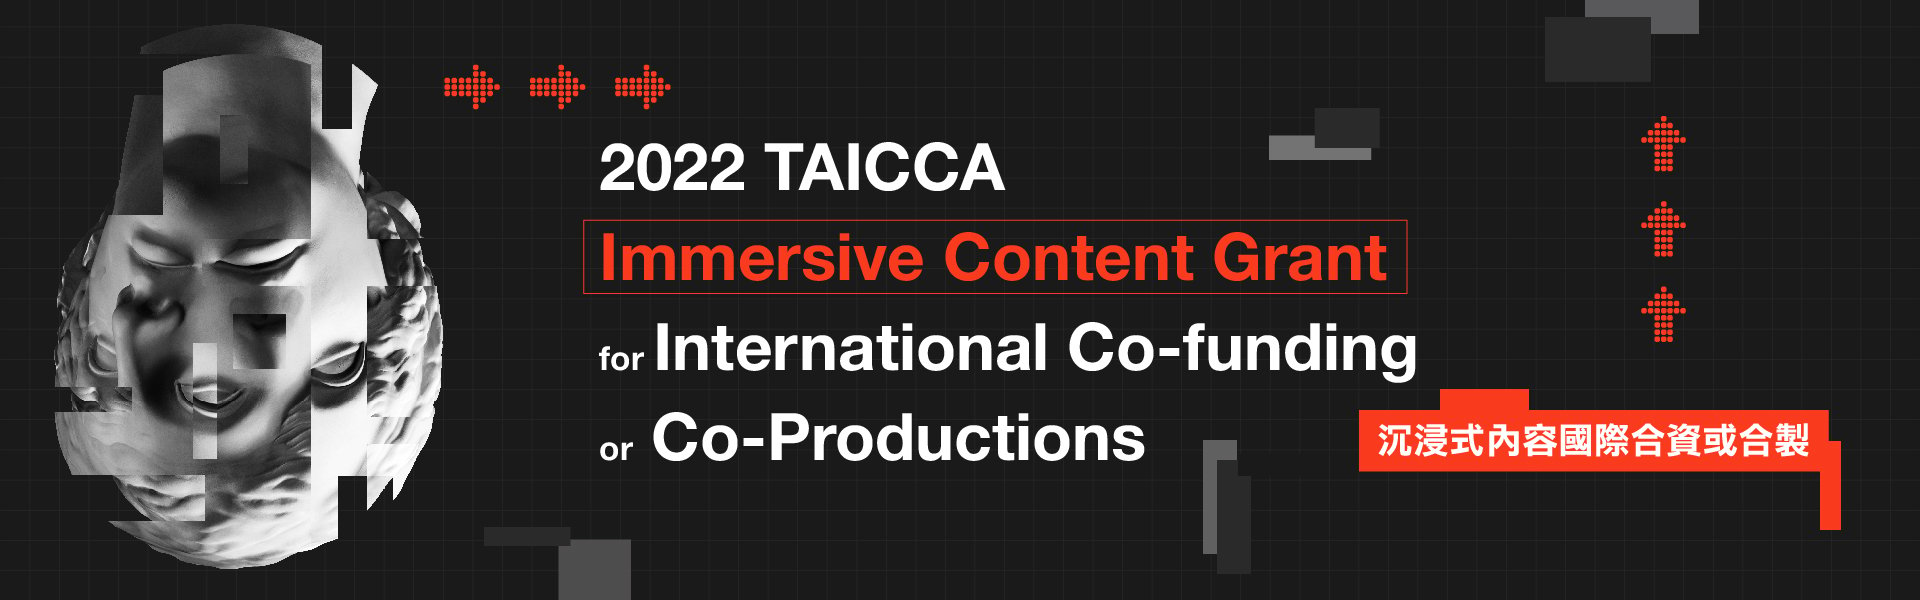 TAICCA Immersive Content Grant for International Co-funding or Co-Productions